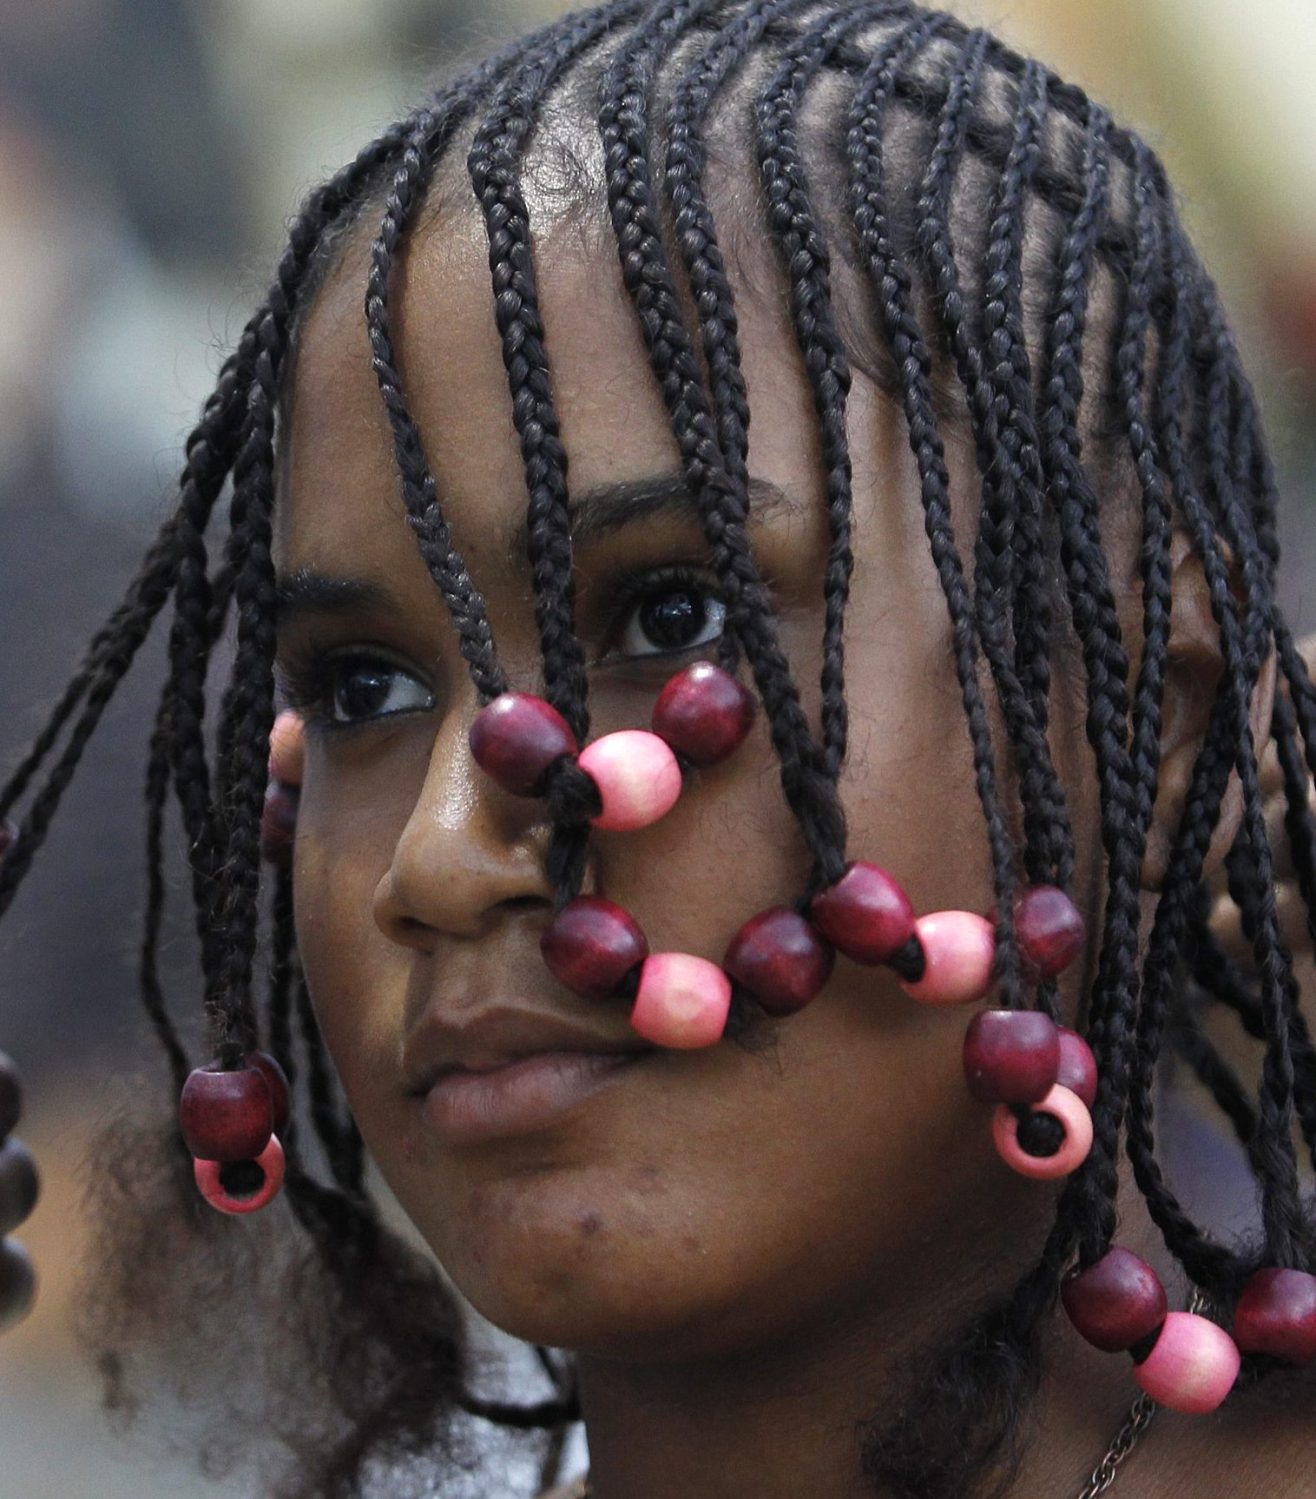 A girl gets an African-Colombian hairstyle during the Afro-hairstyles X Competition in Cali June 1, 2014. REUTERS/Jaime Saldarriaga (COLOMBIA - Tags: SOCIETY)